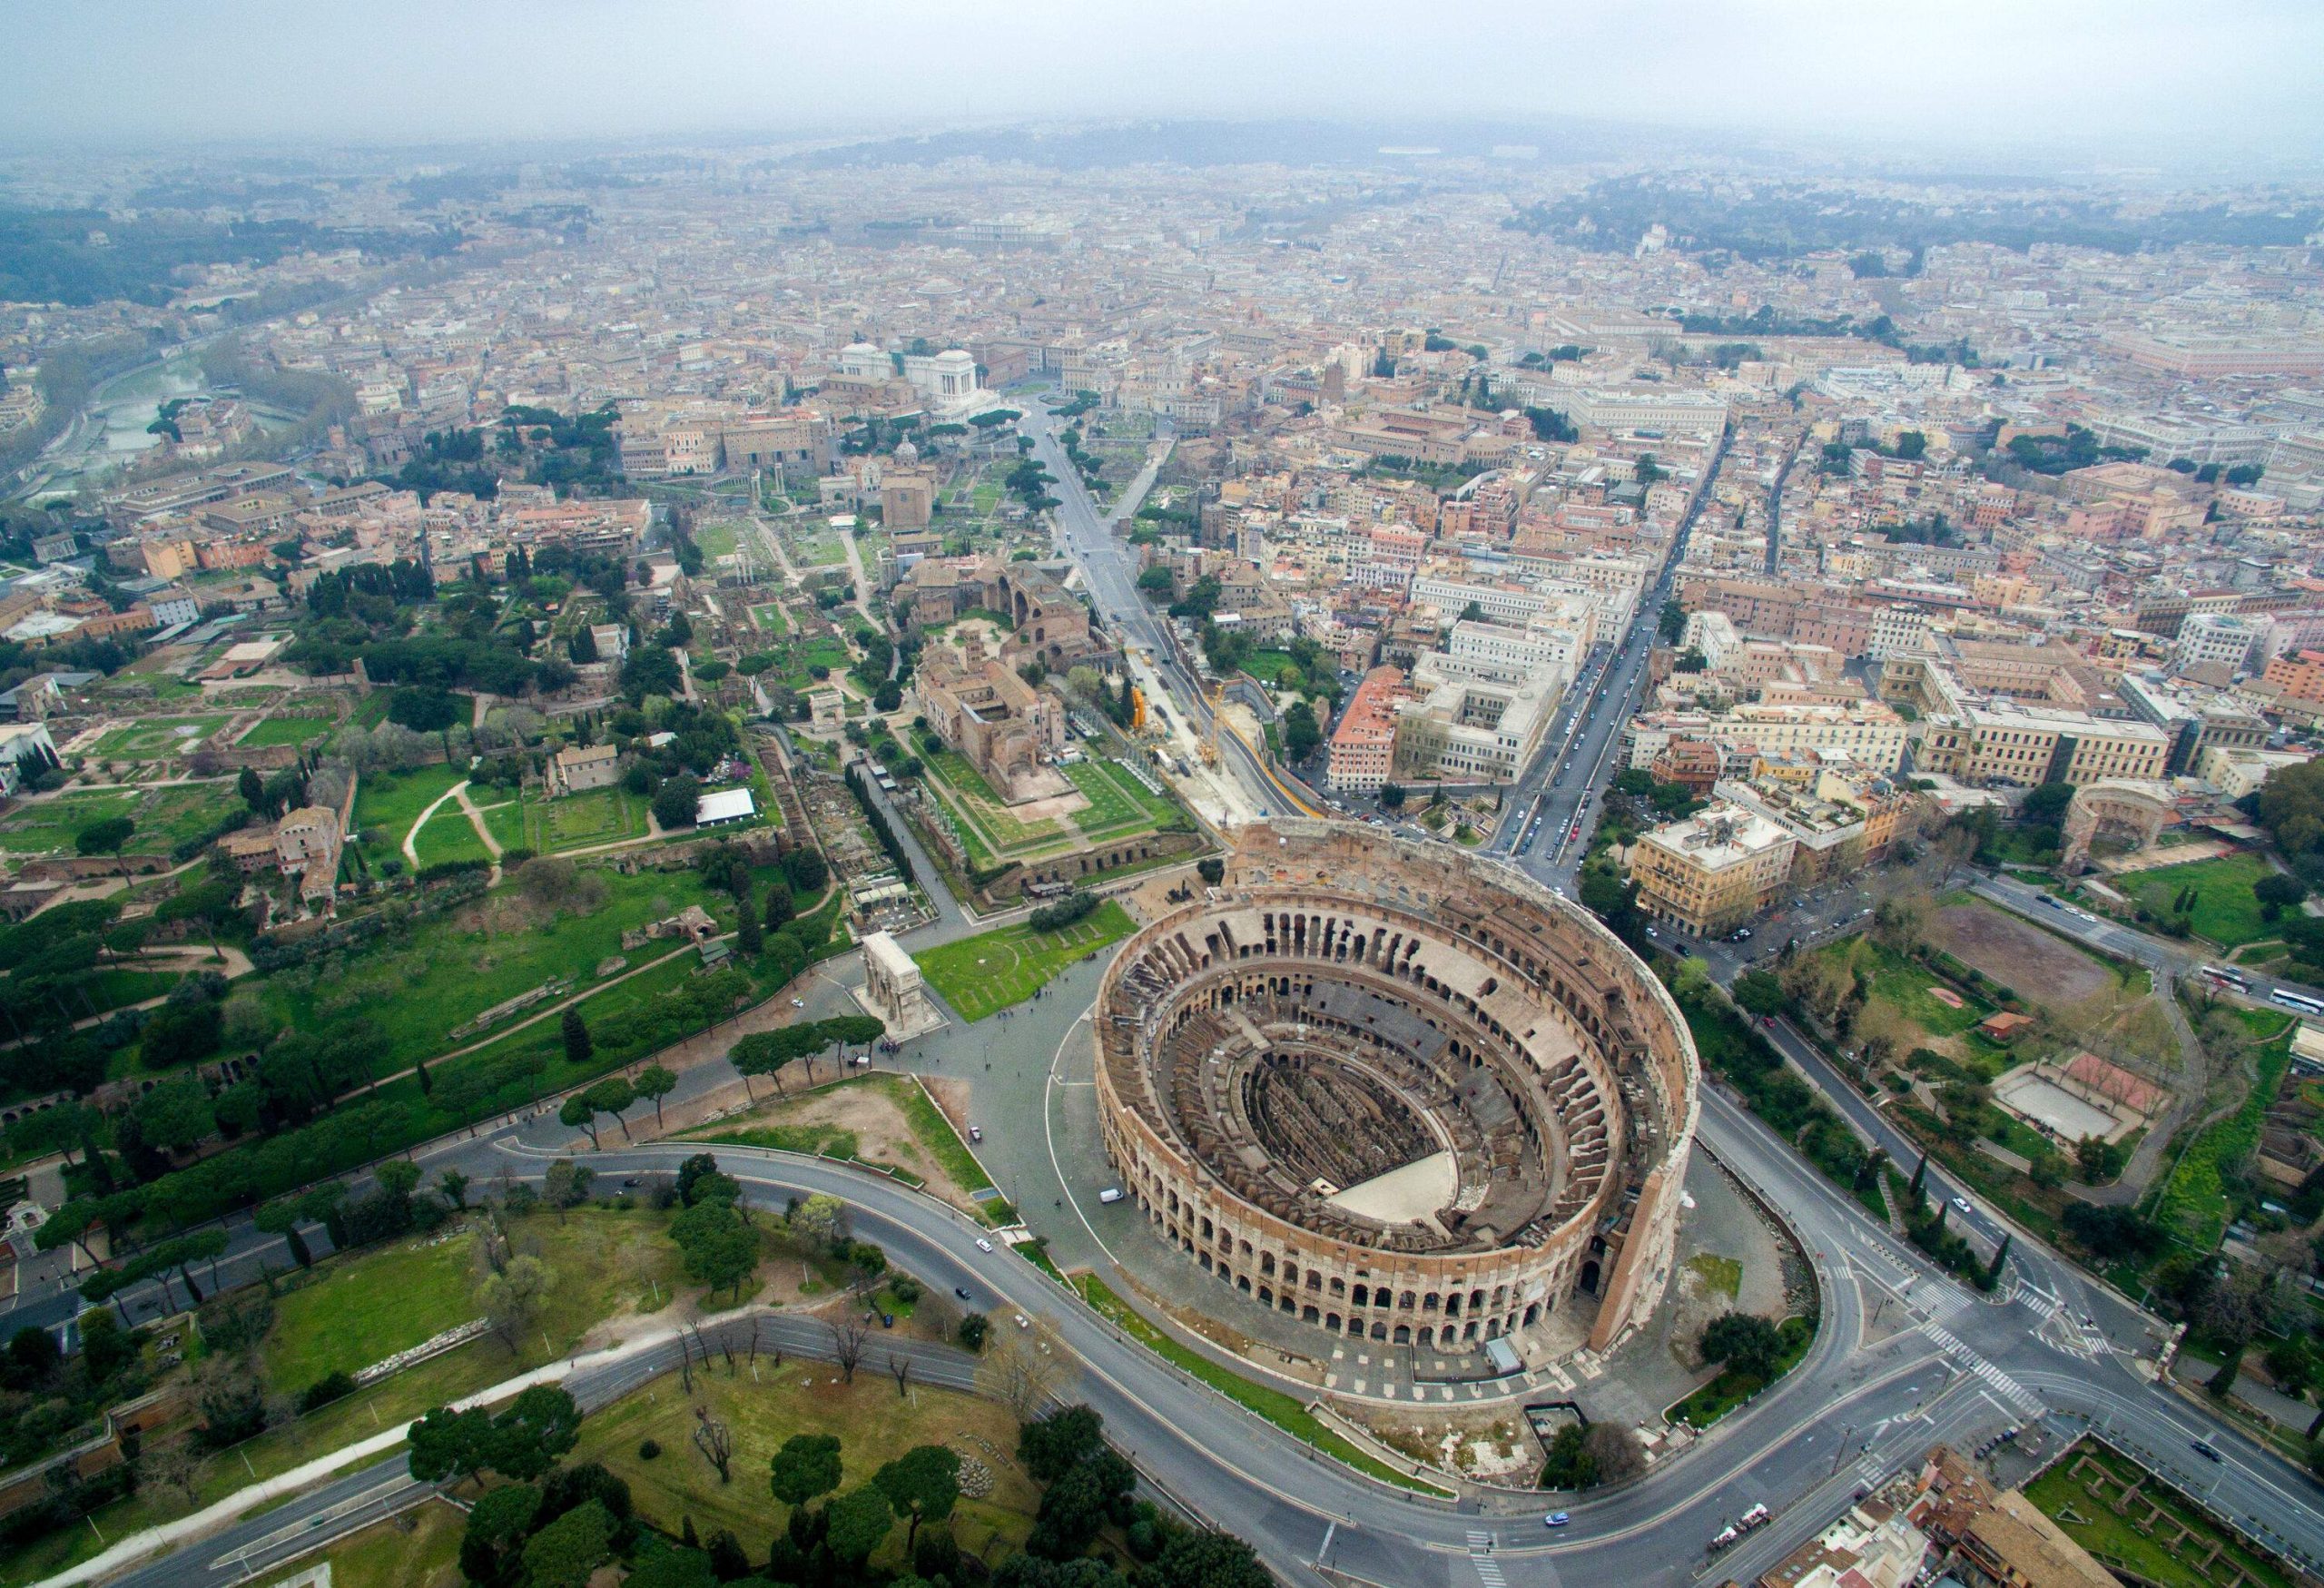 The magnificent city of Rome with avenues that lead straight to the Colosseum.